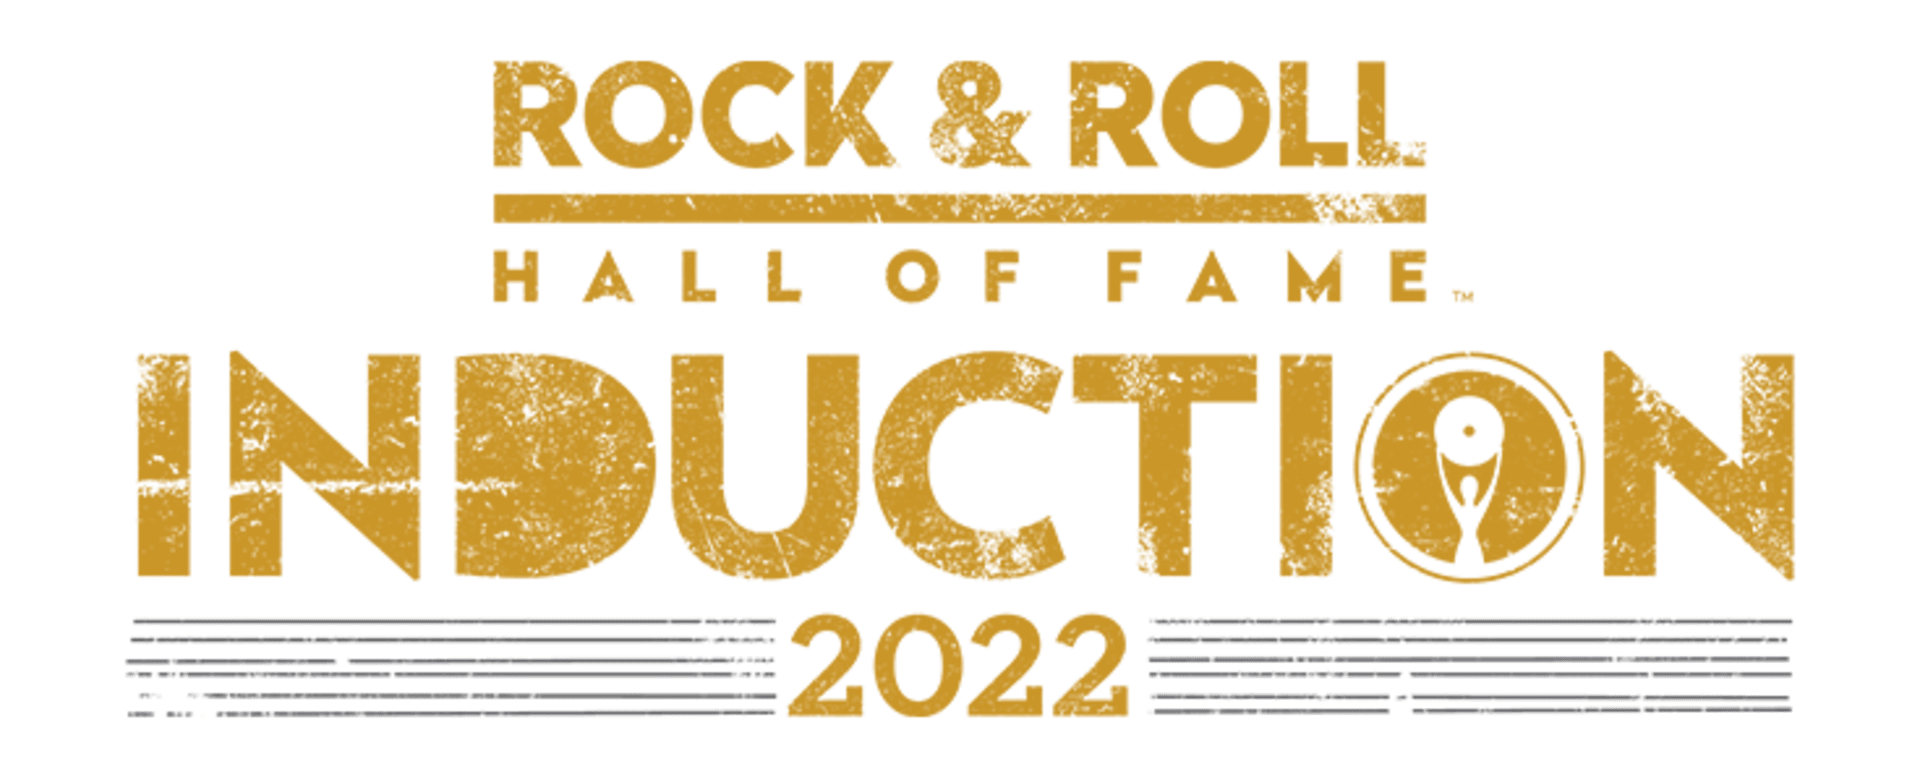 ROCK and ROLL HALL OF FAME FOUNDATION ANNOUNCES NOMINEES FOR 2022 INDUCTION Rock and Roll Hall of Fame